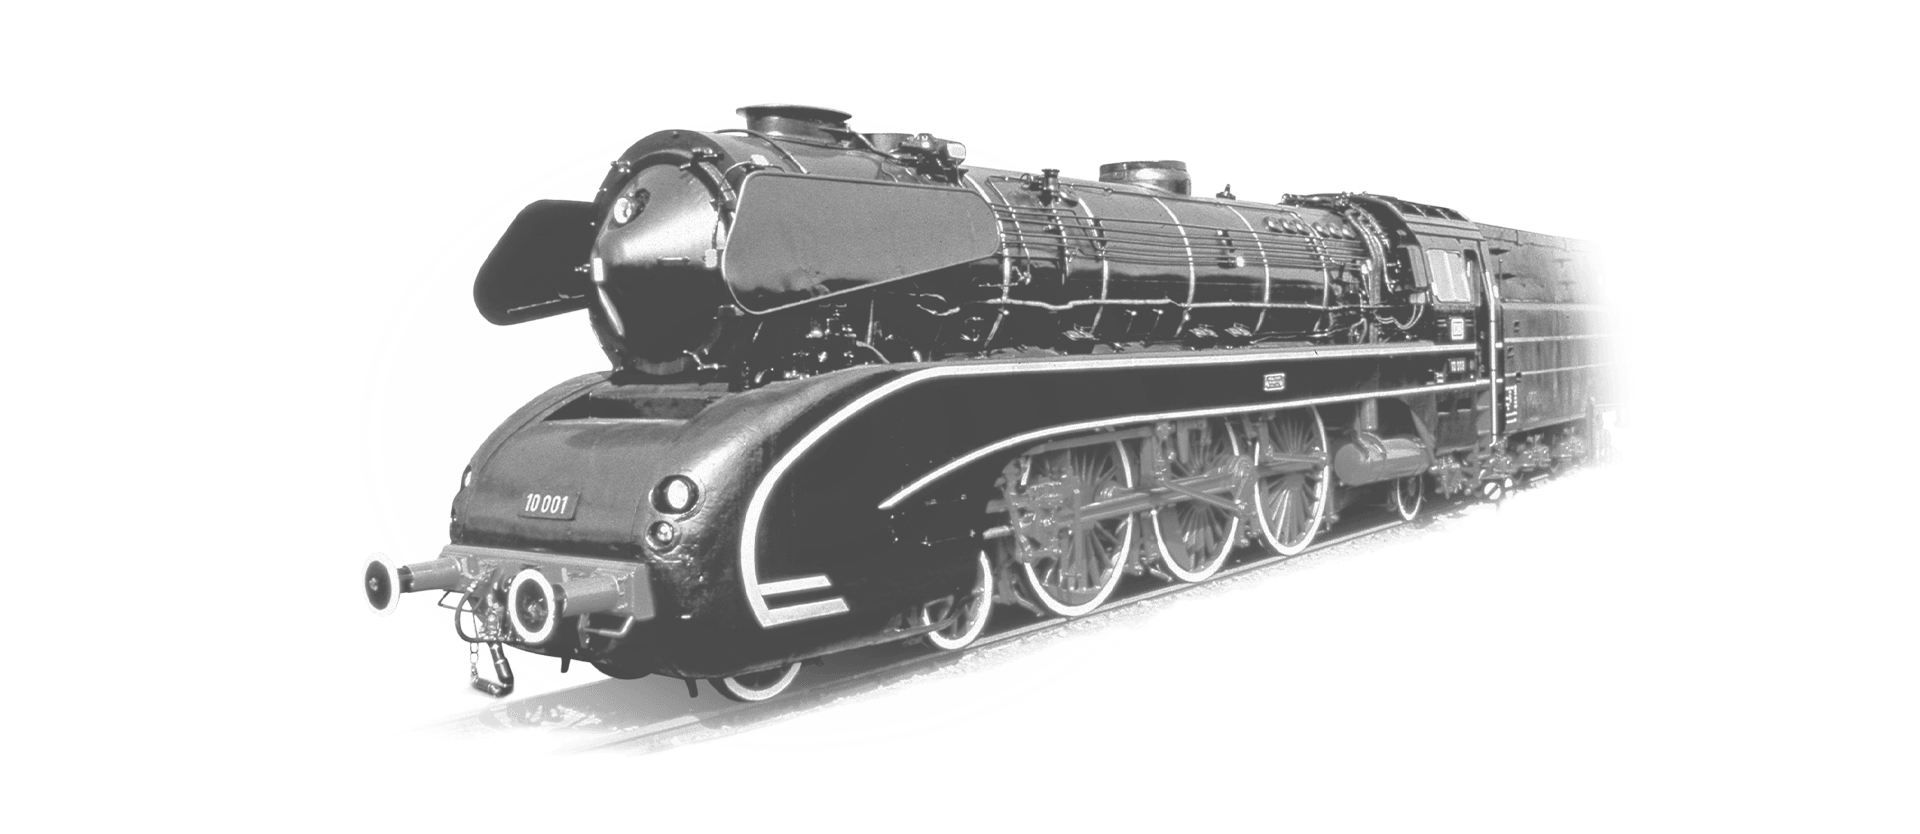 The locomotive 10-001 is coming towards the camera in black and white